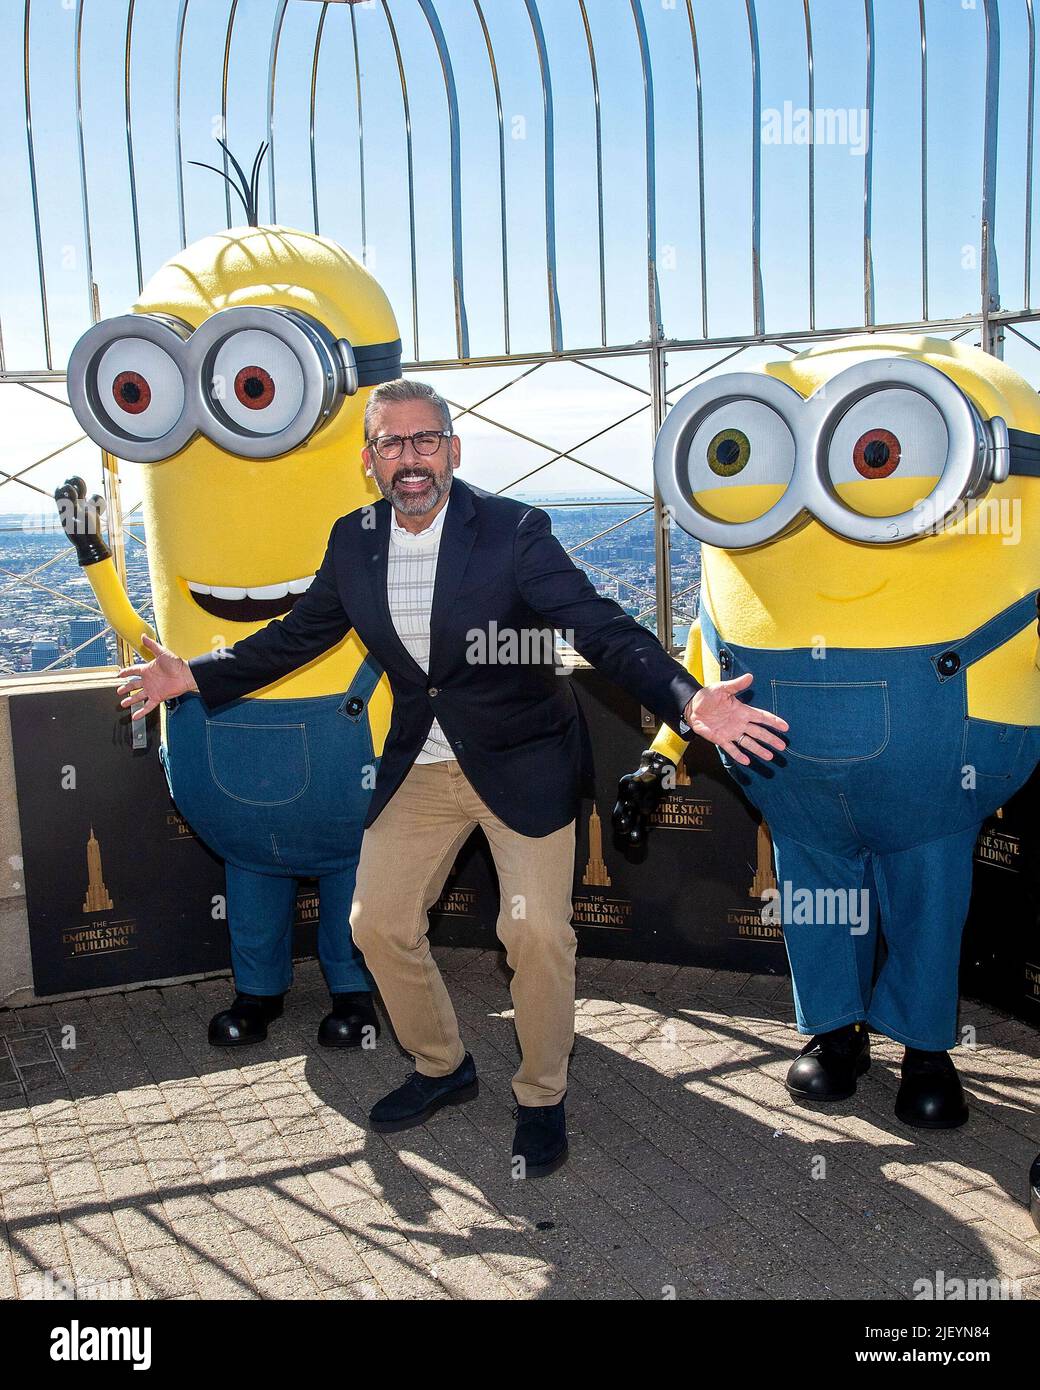 New York, NY, USA. 28th June, 2022. Kevin the Minion, Steve Carell, Bob the Minion celebrating the upcoming premiere of Minions: The Rise of Gru at The Empire State Building. Credit: Steve Mack/Alamy Live News Stock Photo